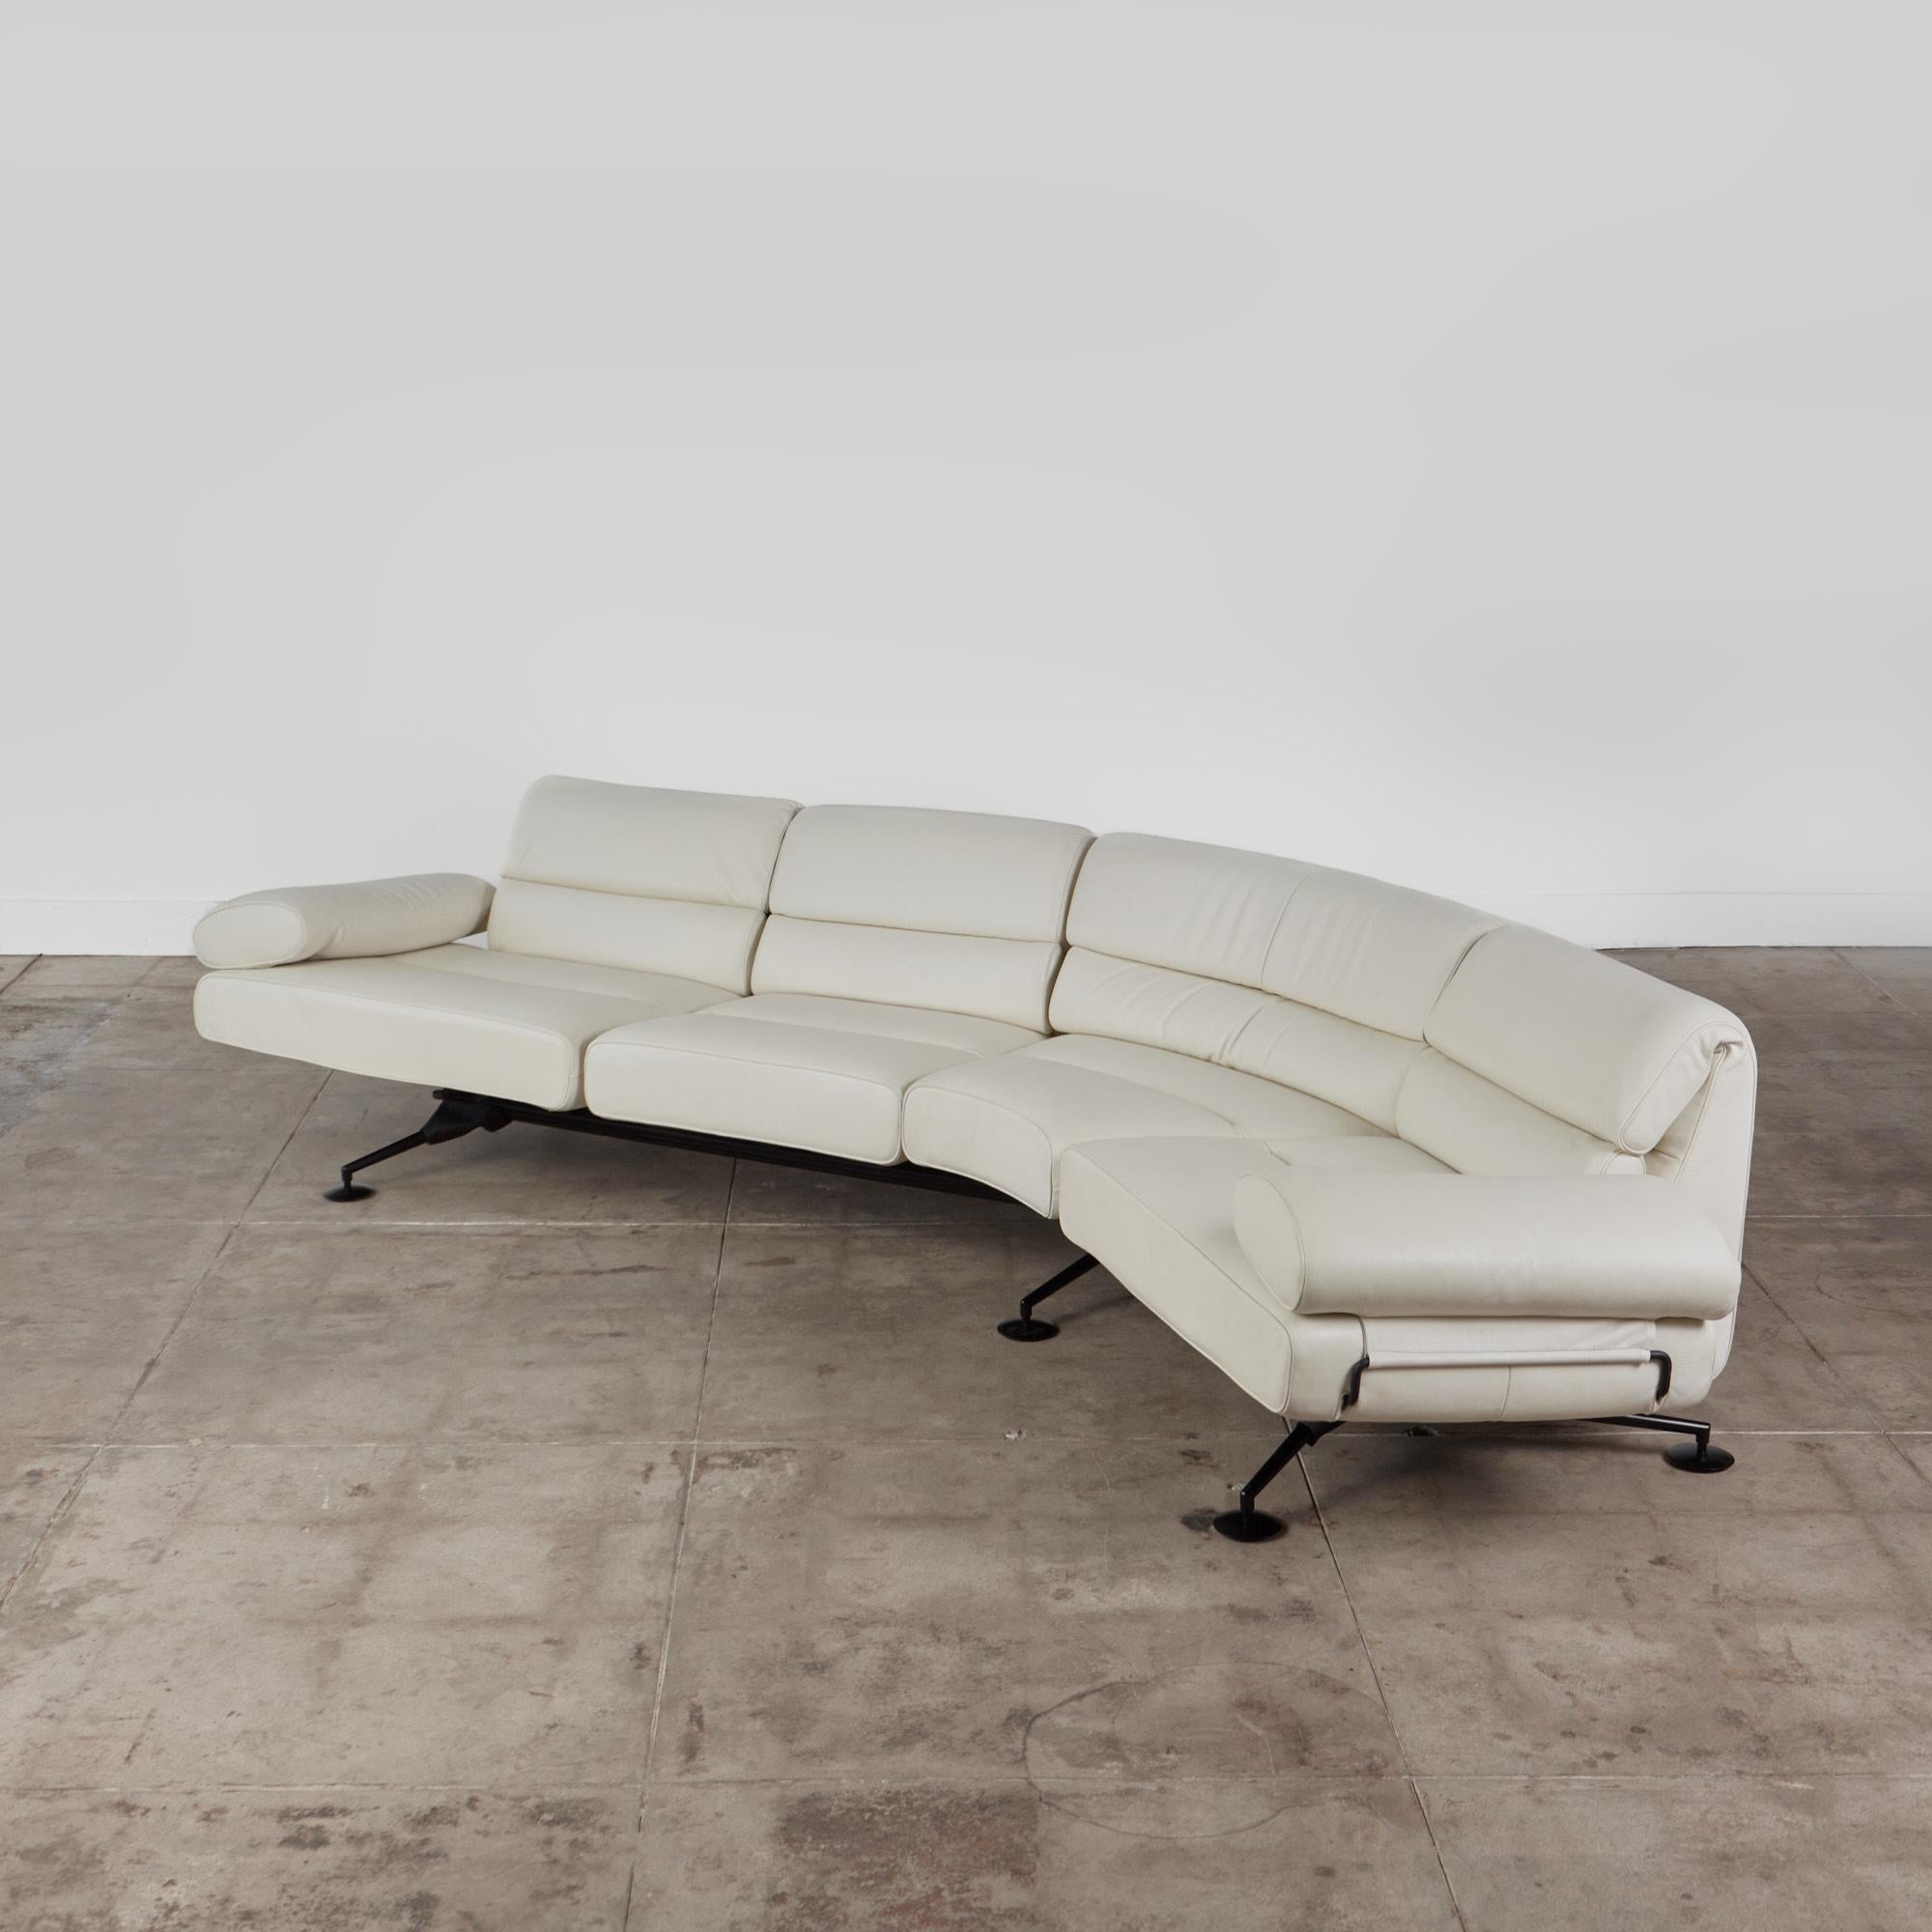 DS 470 leather sofa by De Sede, Switzerland. The sofa features flat grain cream leather cushions and seat back. There are four seats on this sofa; the two outer seats swivel into a fully reclined position with the lever located on either end. The